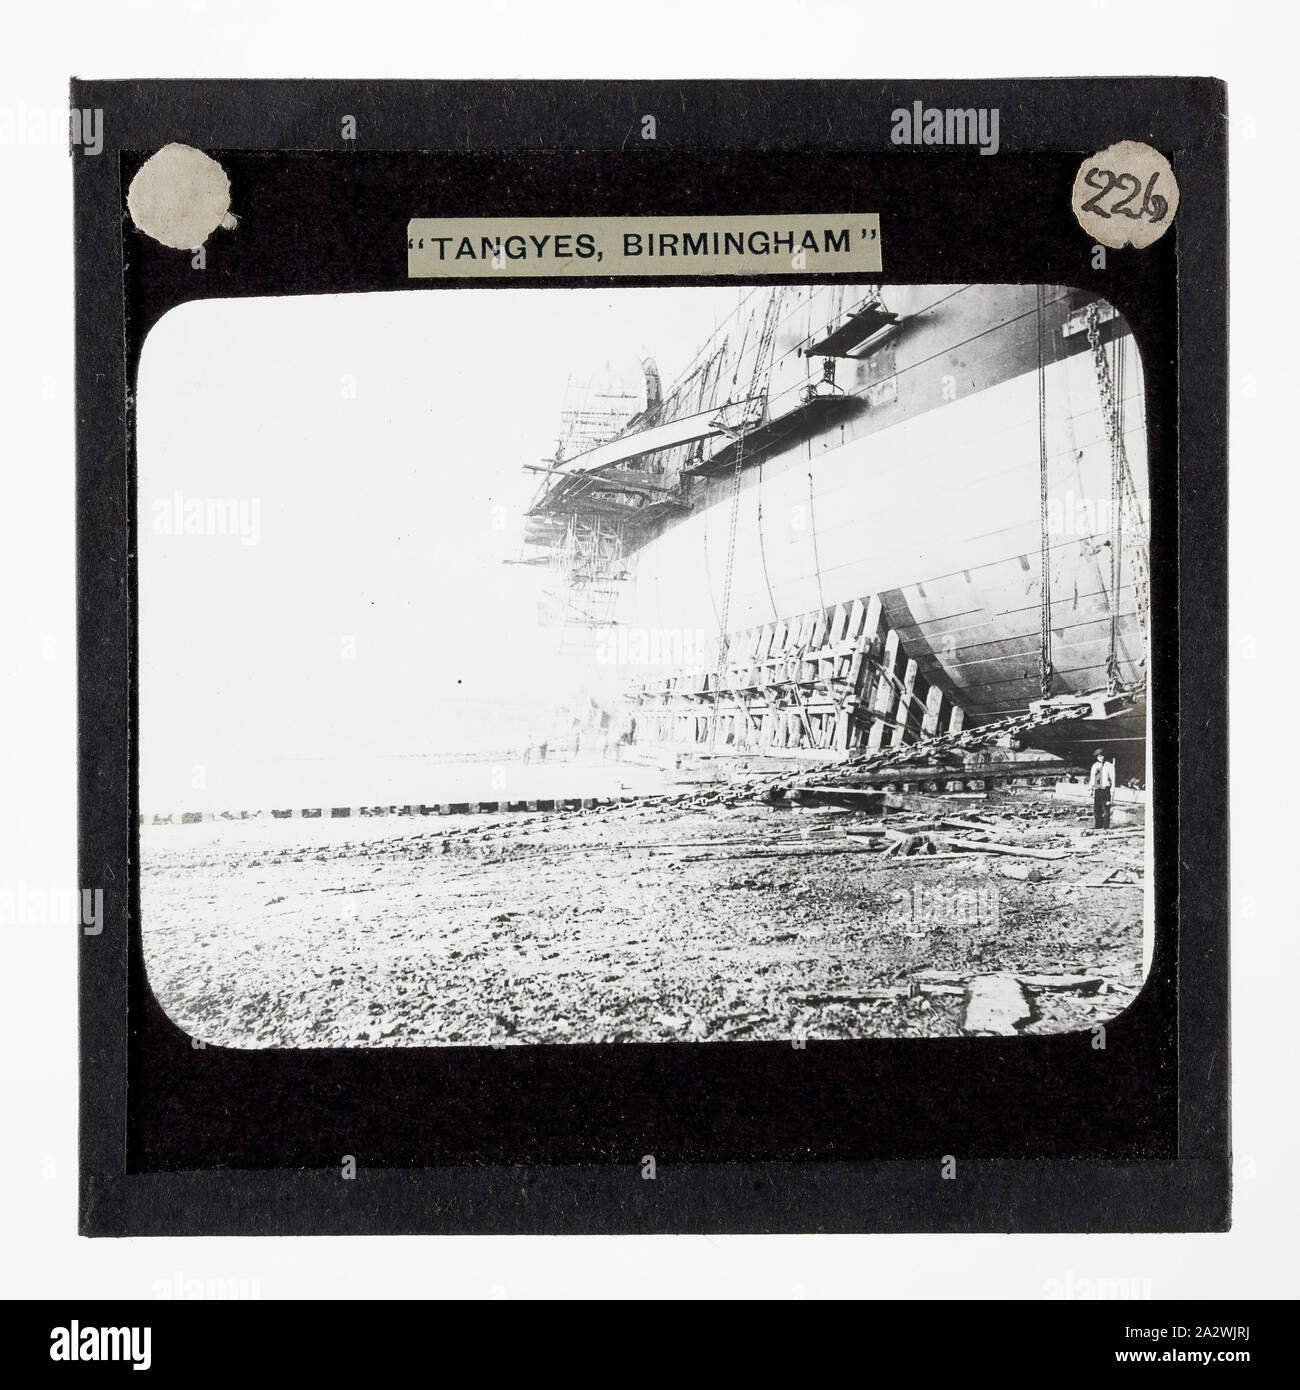 Lantern Slide - Tangyes Ltd, Launching of the SS Great Eastern, 1858, One of 239 glass lantern slides depicting products manufactured by Tangyes Limited engineers of Birmingham, England. The images include various products such as engines, centrifugal pumps, hydraulic pumps, gas producers, materials testing machines, presses, machine tools, hydraulic jacks etc. Tangyes was a company which operated from 1857 to 1957. They produced a wide variety of engineering Stock Photo